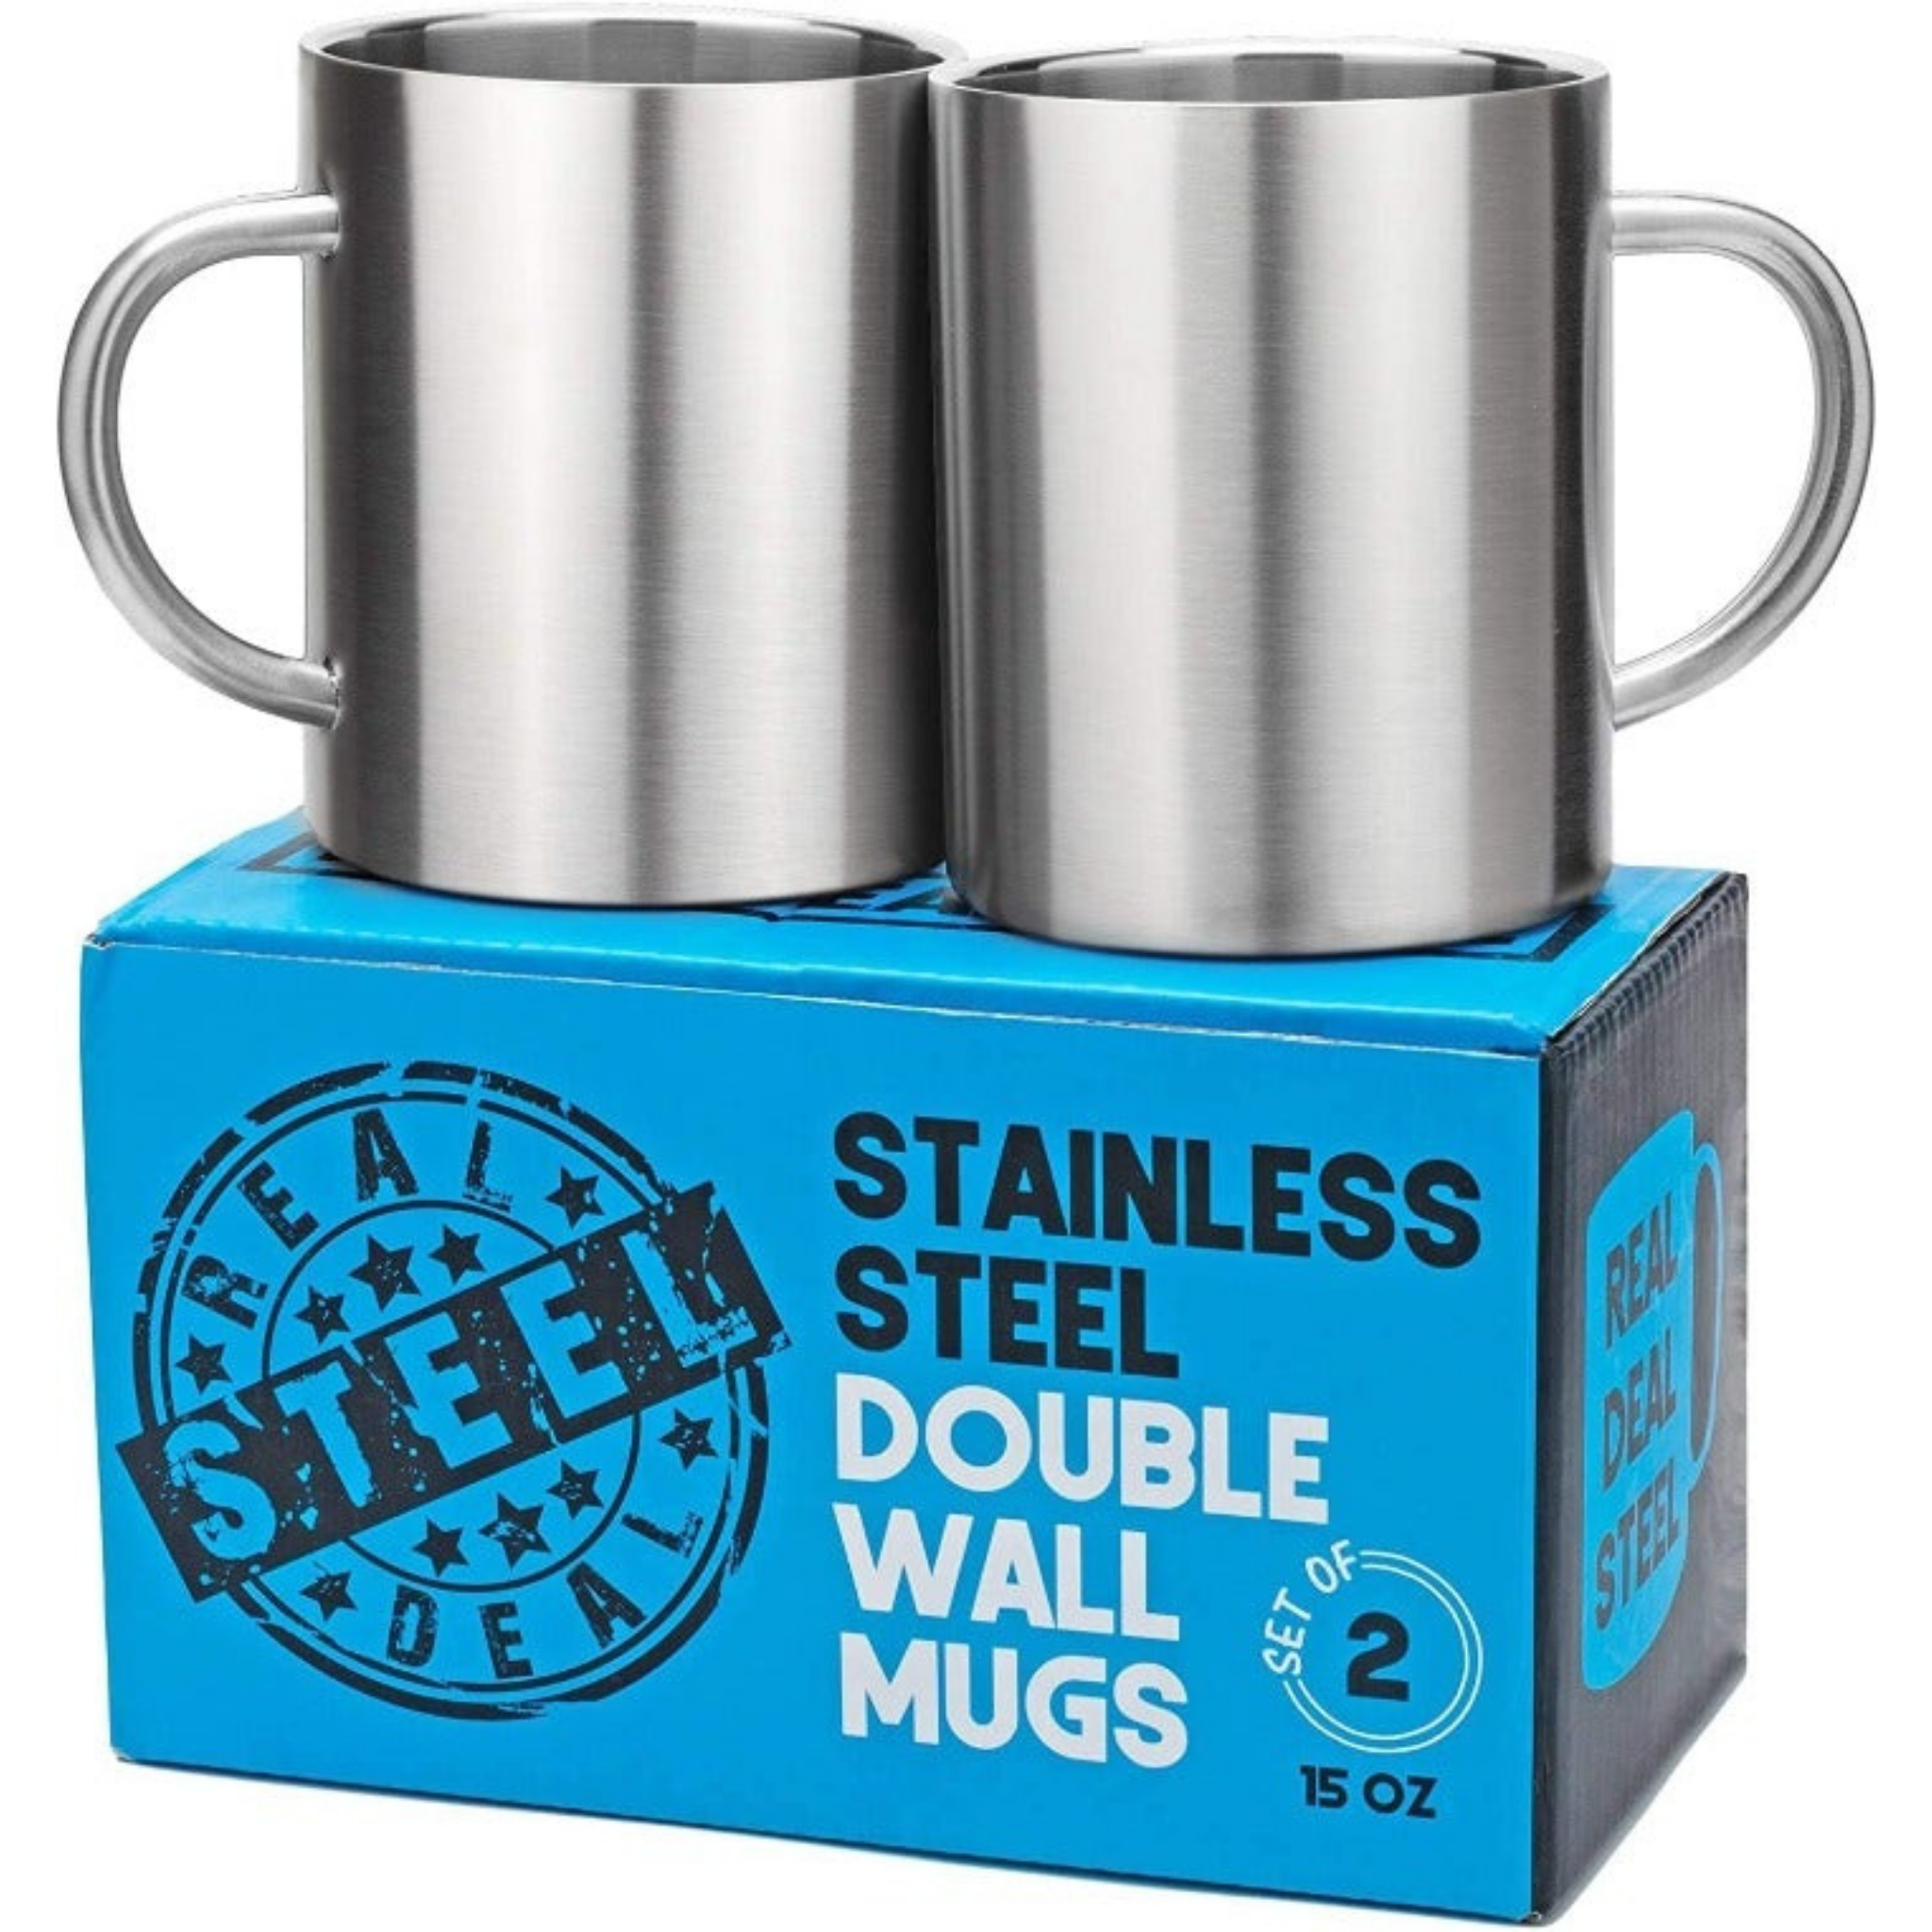 Double Walled Stainless Steel Thermal Mugs (Set of 2)